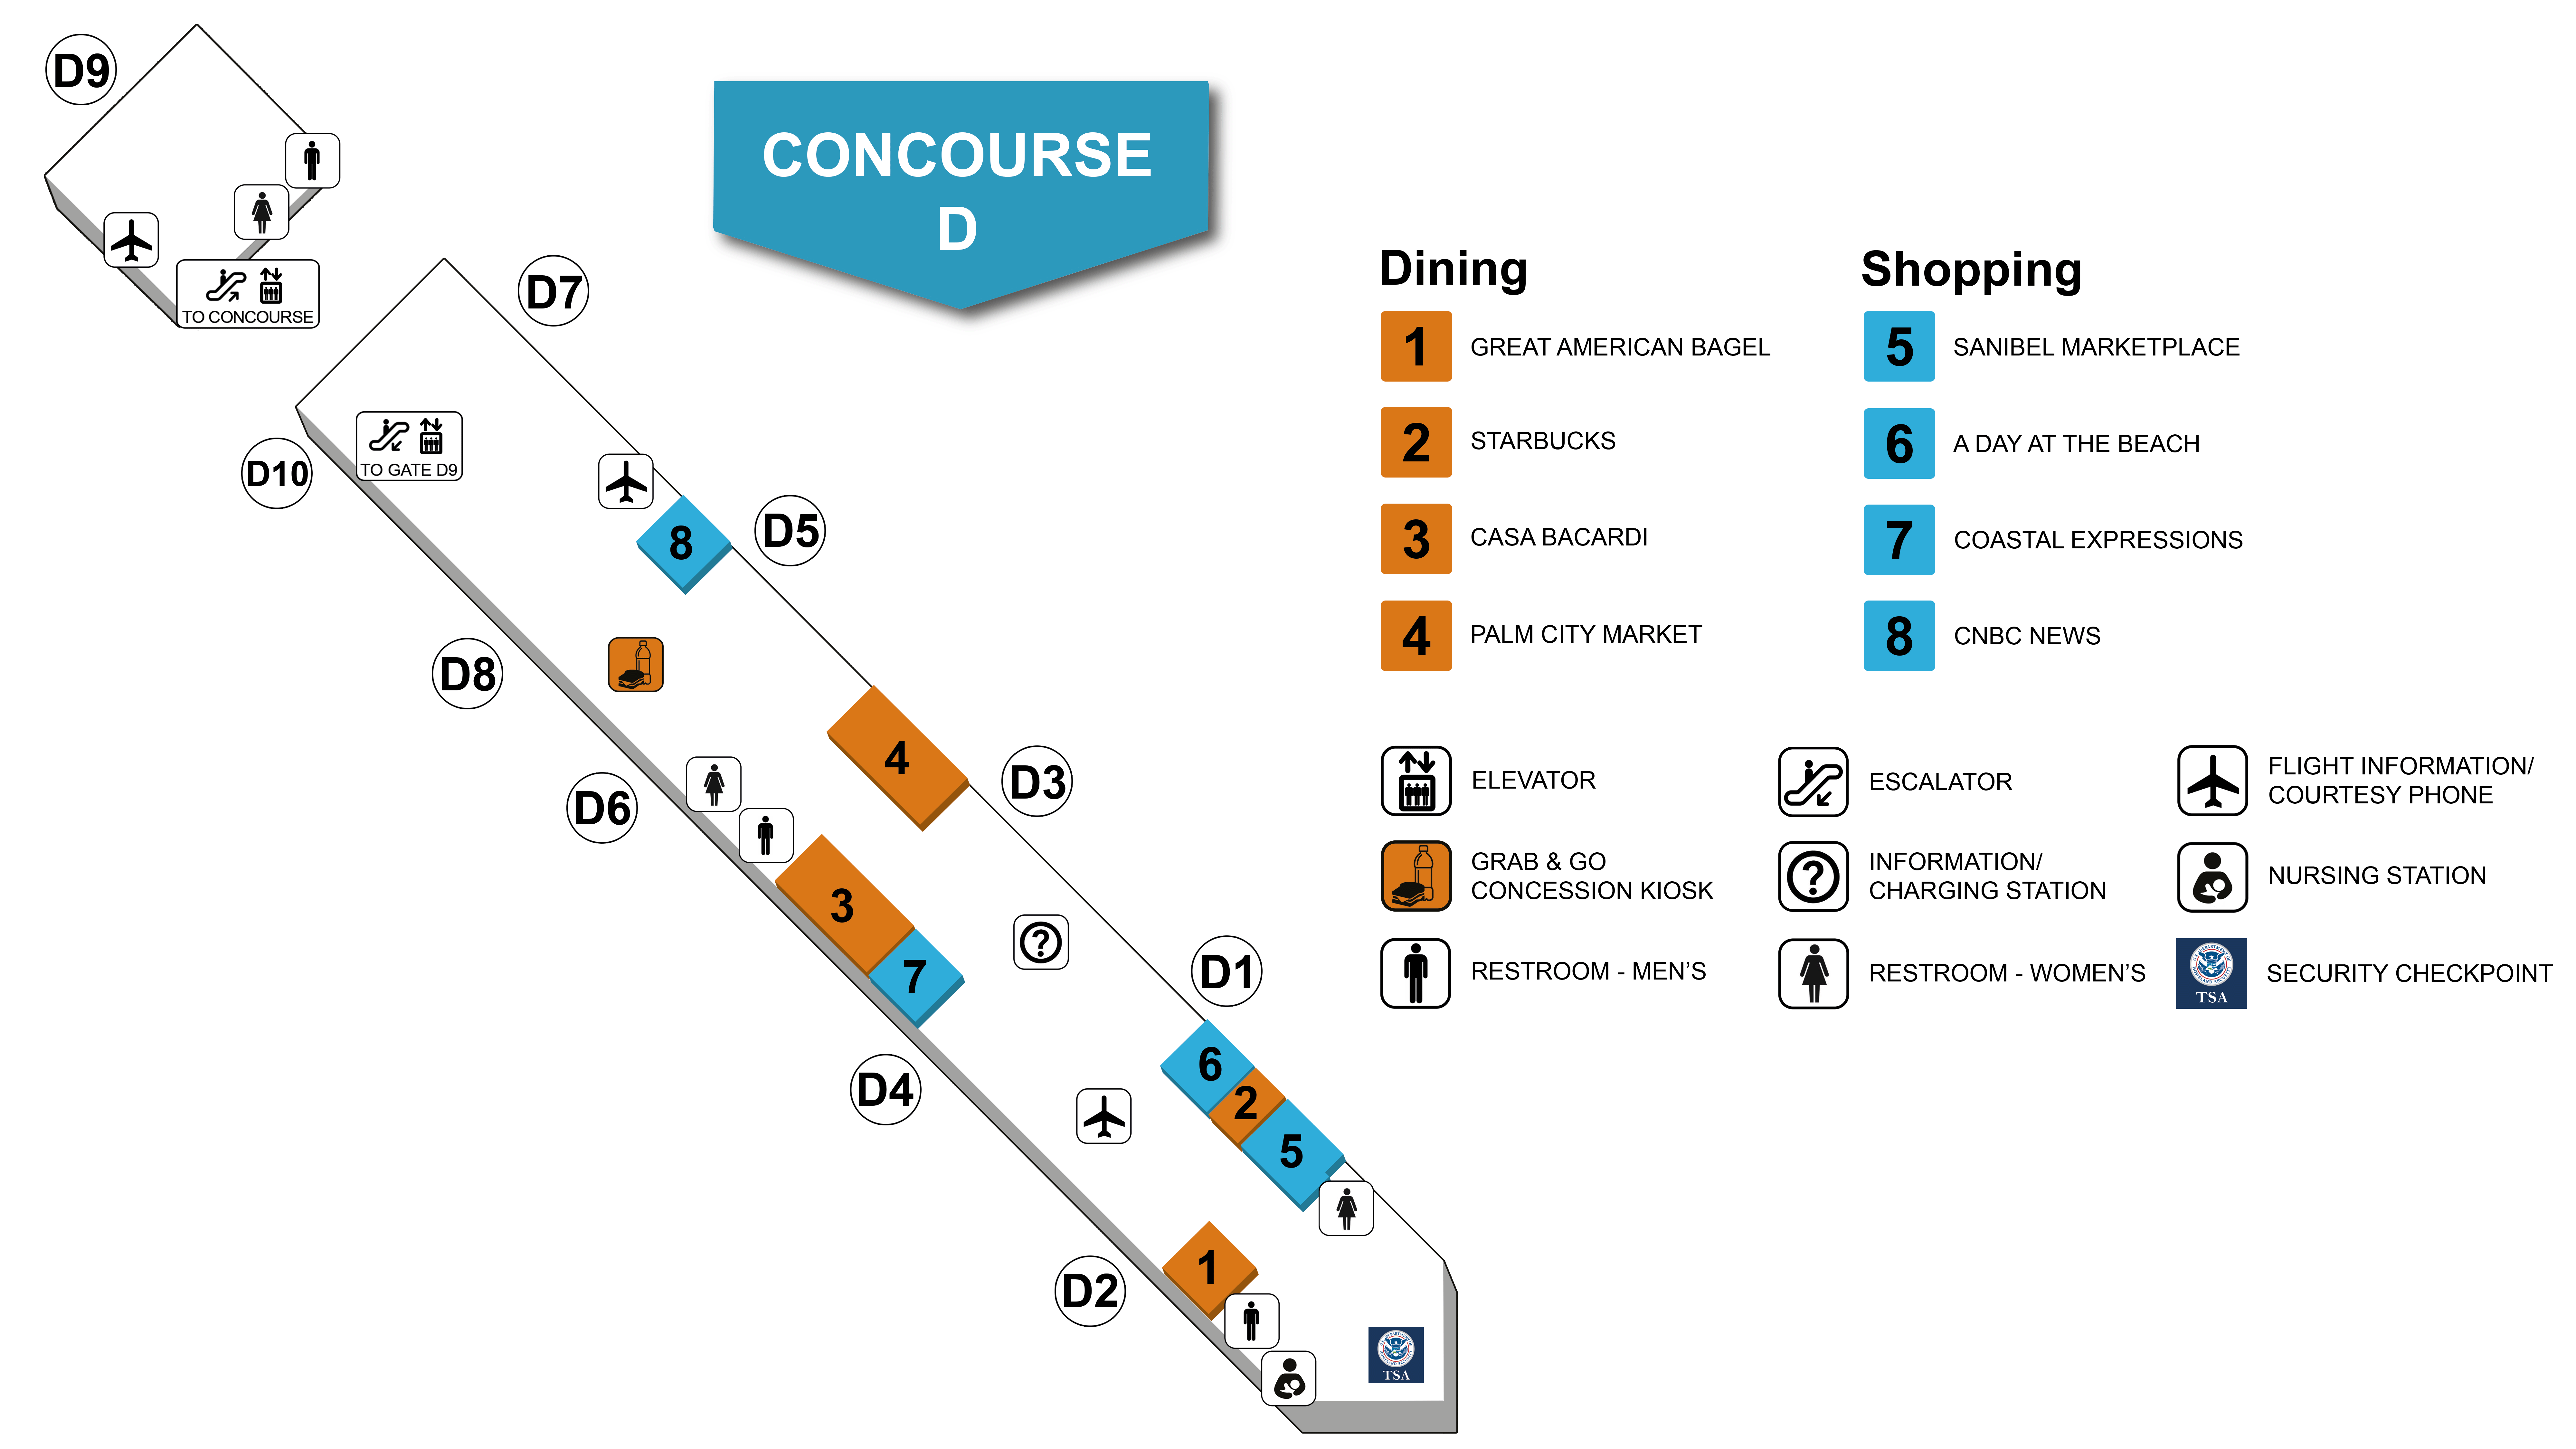 Southwest Florida International Airport Concourse D Map and Index